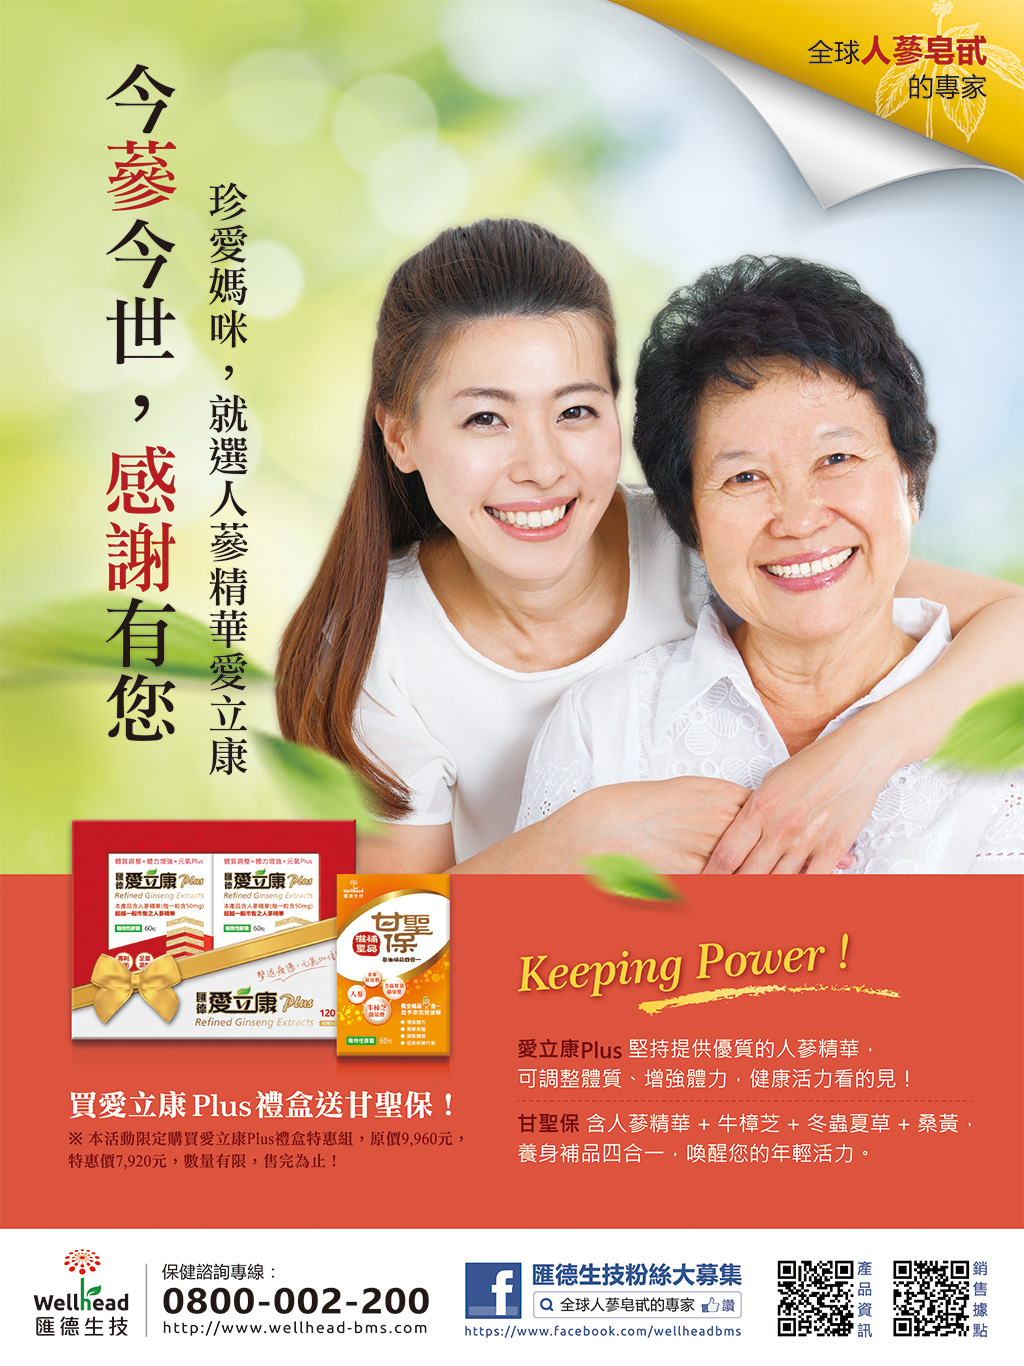 Dear Mother, we owe everything to you, which is why you deserve Refined Ginseng Extracts-Plus!